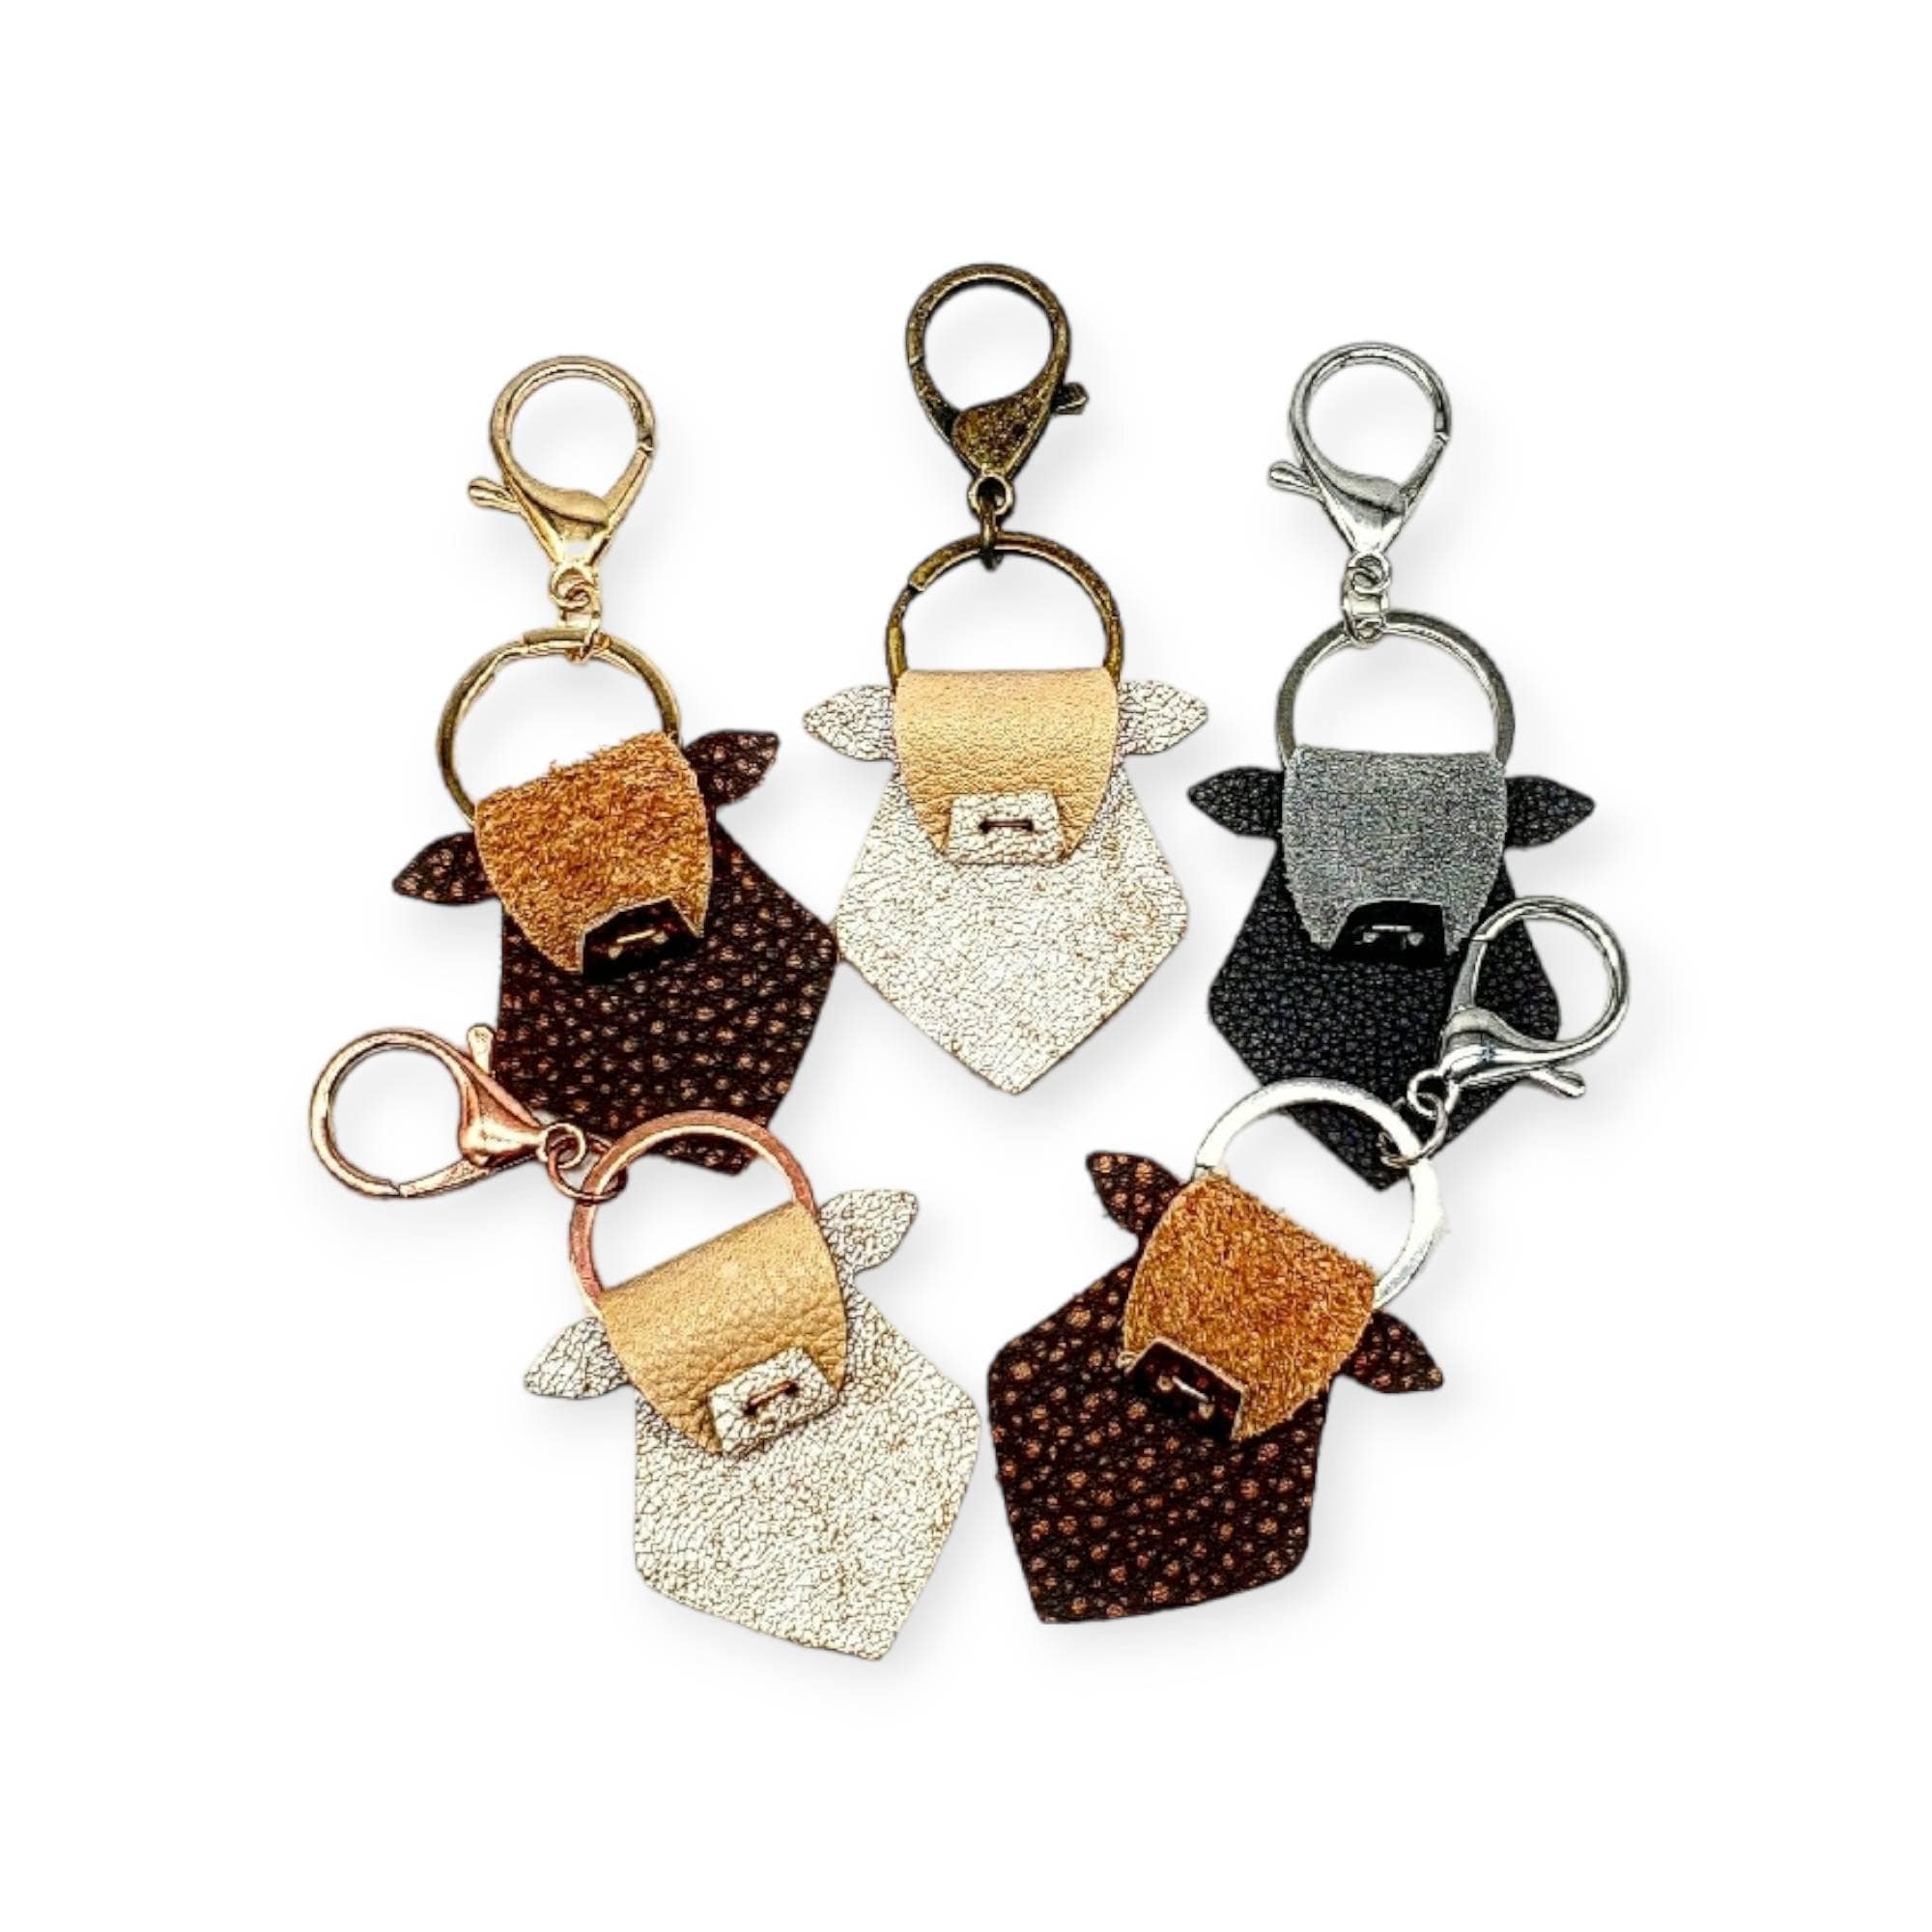 Highland Cow Yellow Leather Keyring For Men And Women By Yoshi